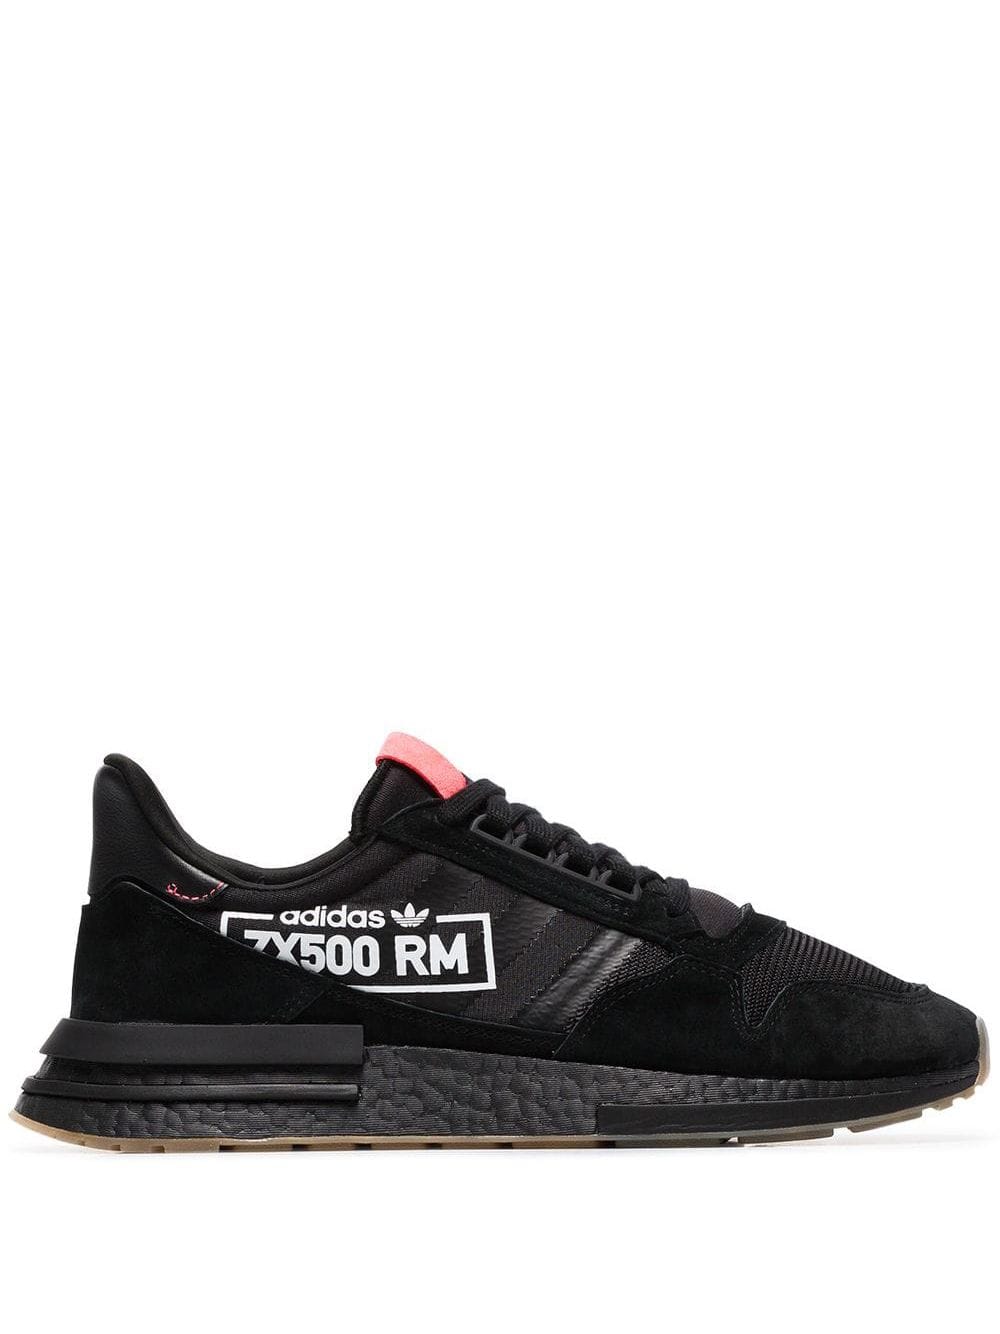 adidas ZX 500 RM (BB7443) - SNEAKER SEARCH